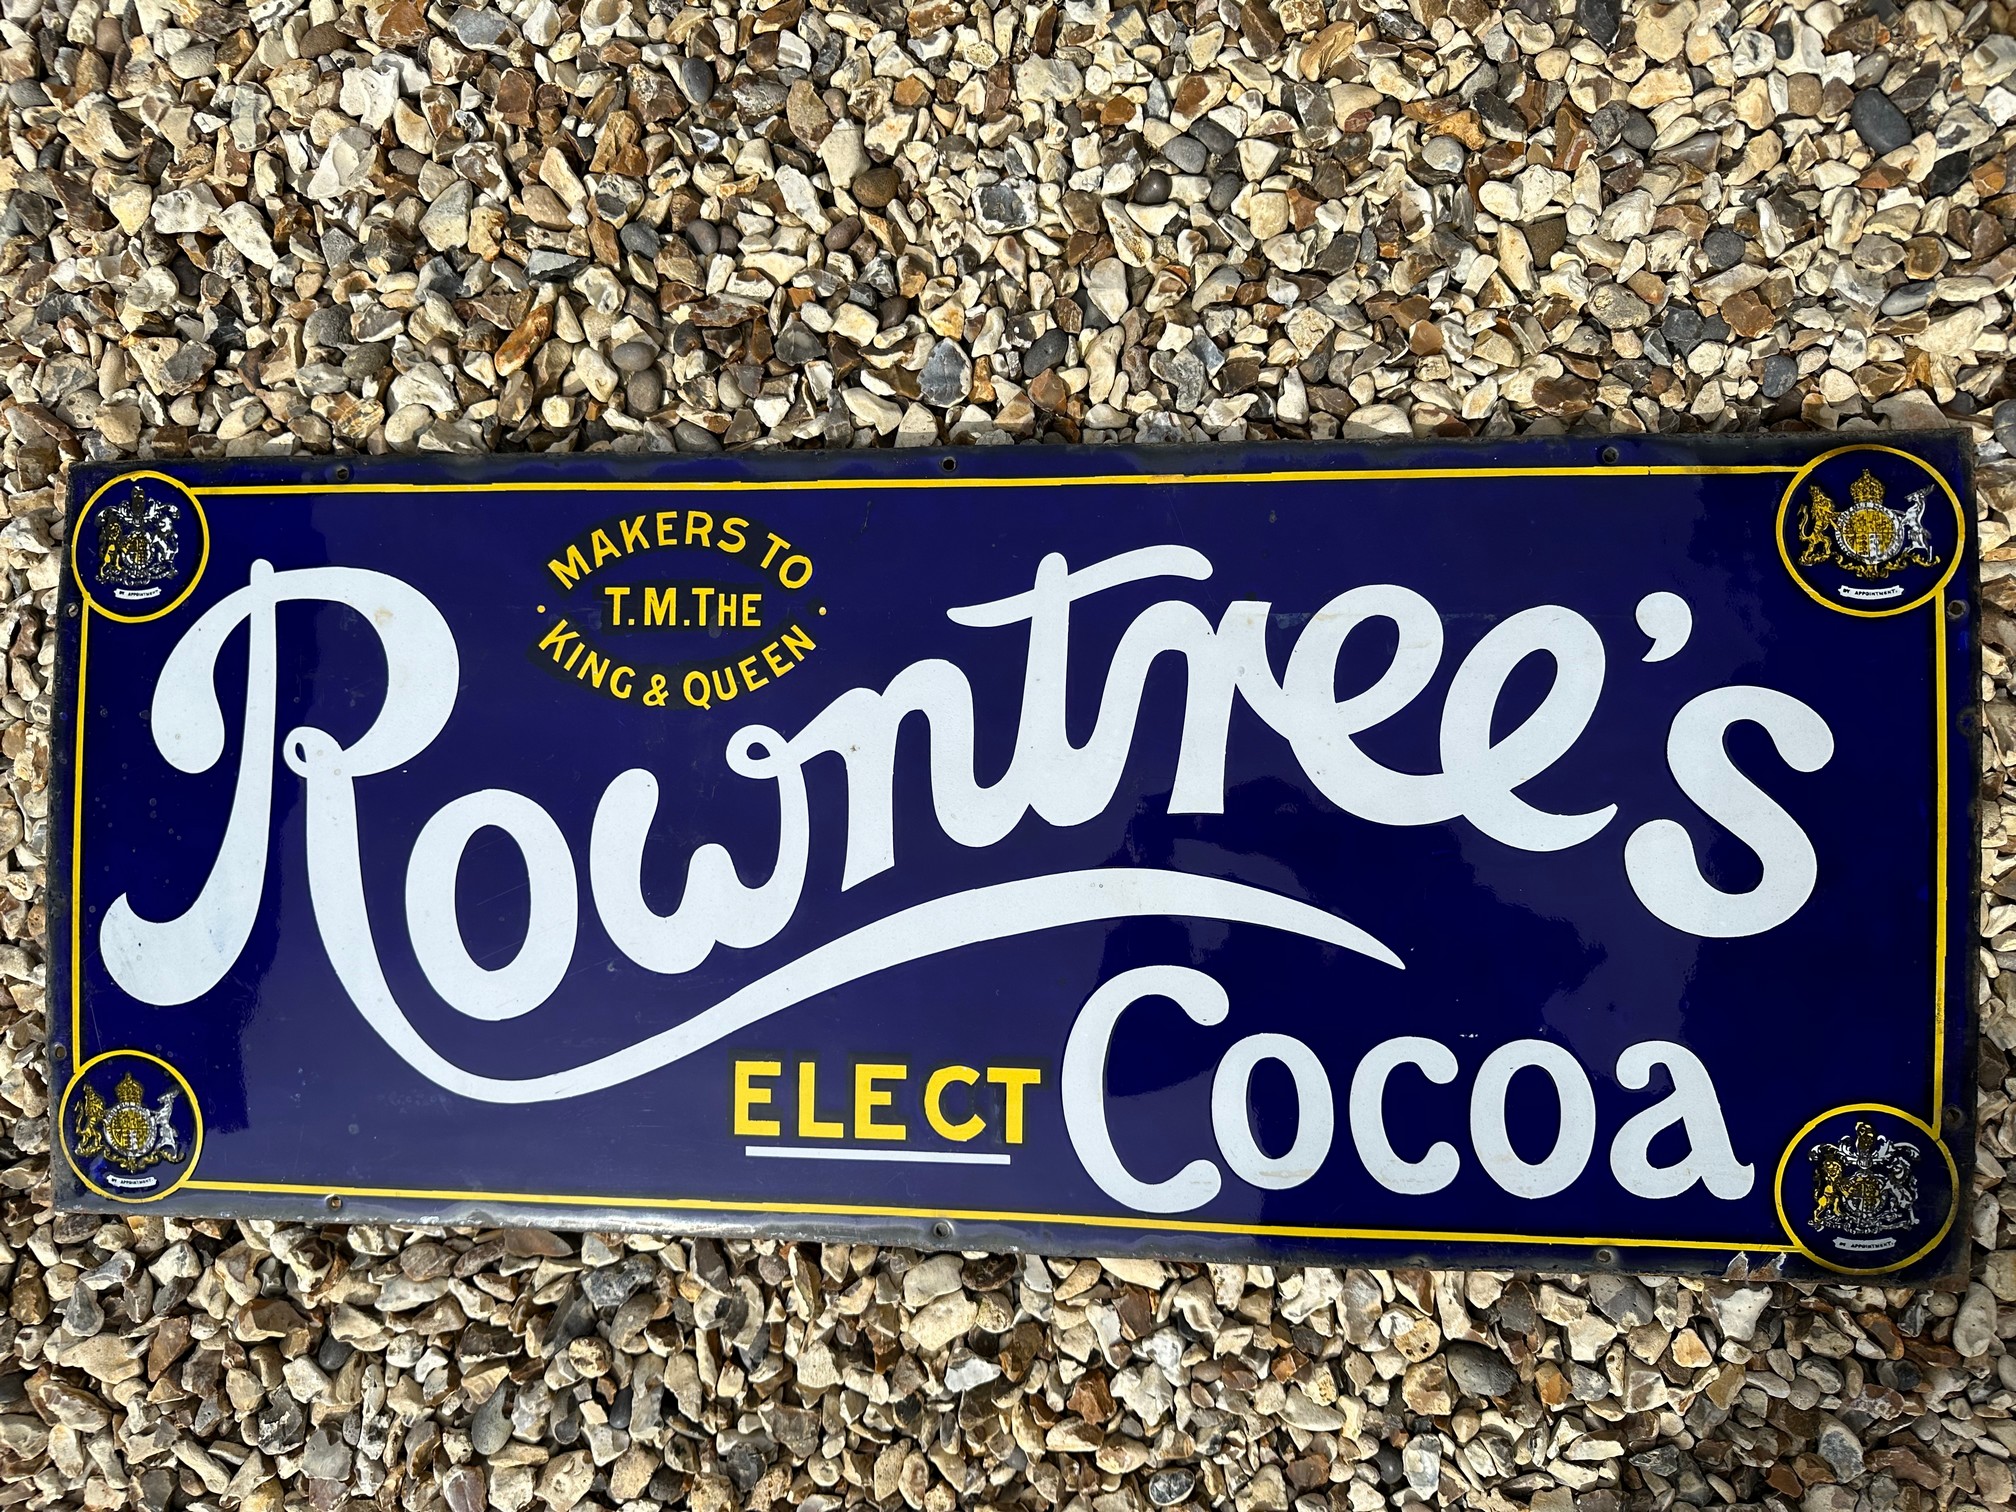 A Rowntree Elect Cocoa enamel advertising sign, 'Makers to T.M. The King & Queen, 36 x 15".